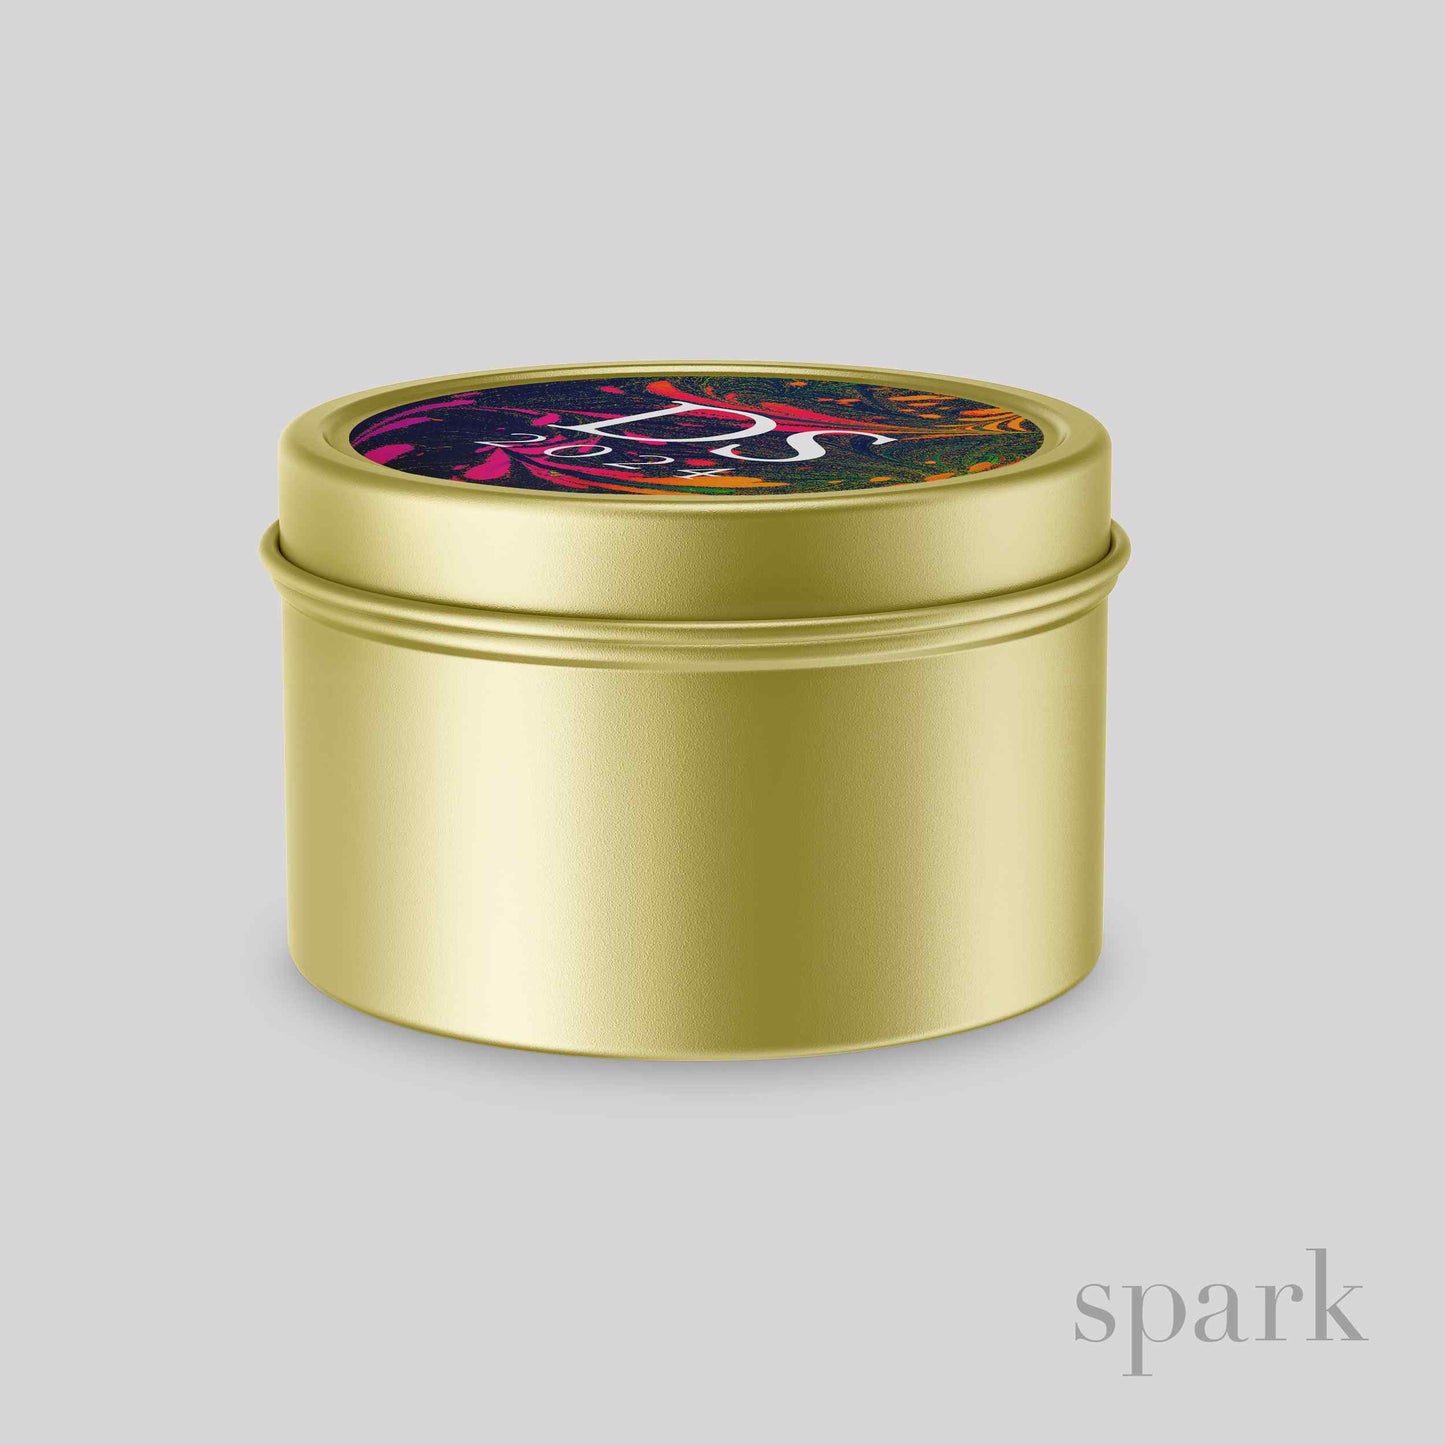 Custom 4oz Aromatherapy Soy Candle in Gold Tin - Choose Your Label Design & Scent